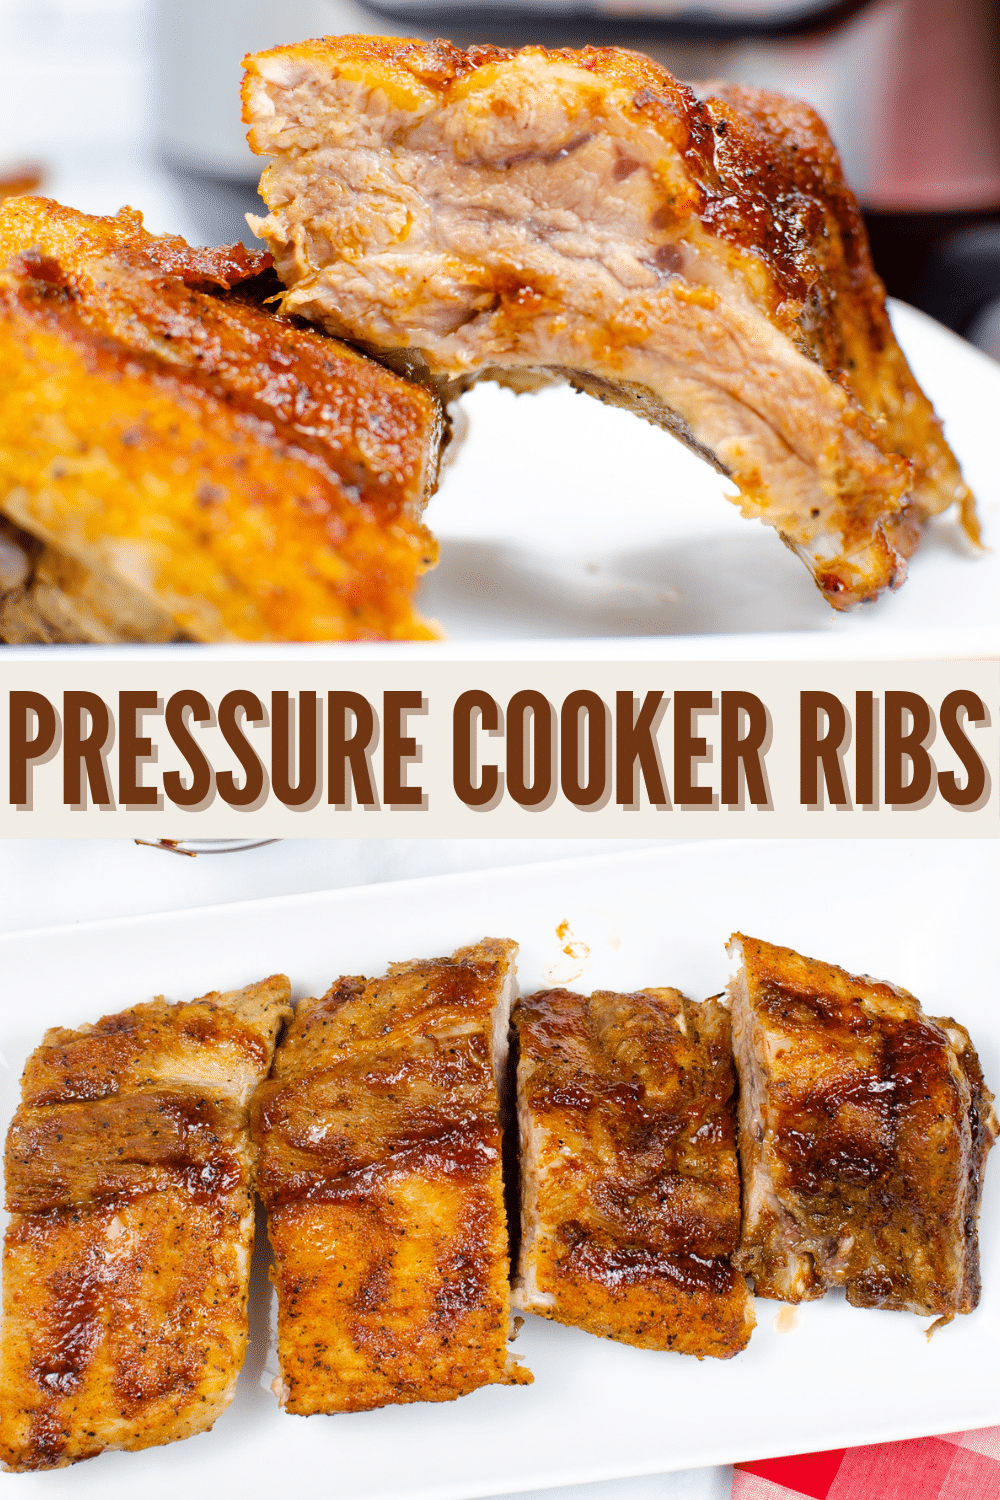 Pressure Cooker Ribs are falling-off-the-bone delicious, and they’re so easy to make! You’ll never go back to slow cooker or grilled ribs! #instantpot #pressurecooker #ribs #pressurecookerribs via @wondermomwannab